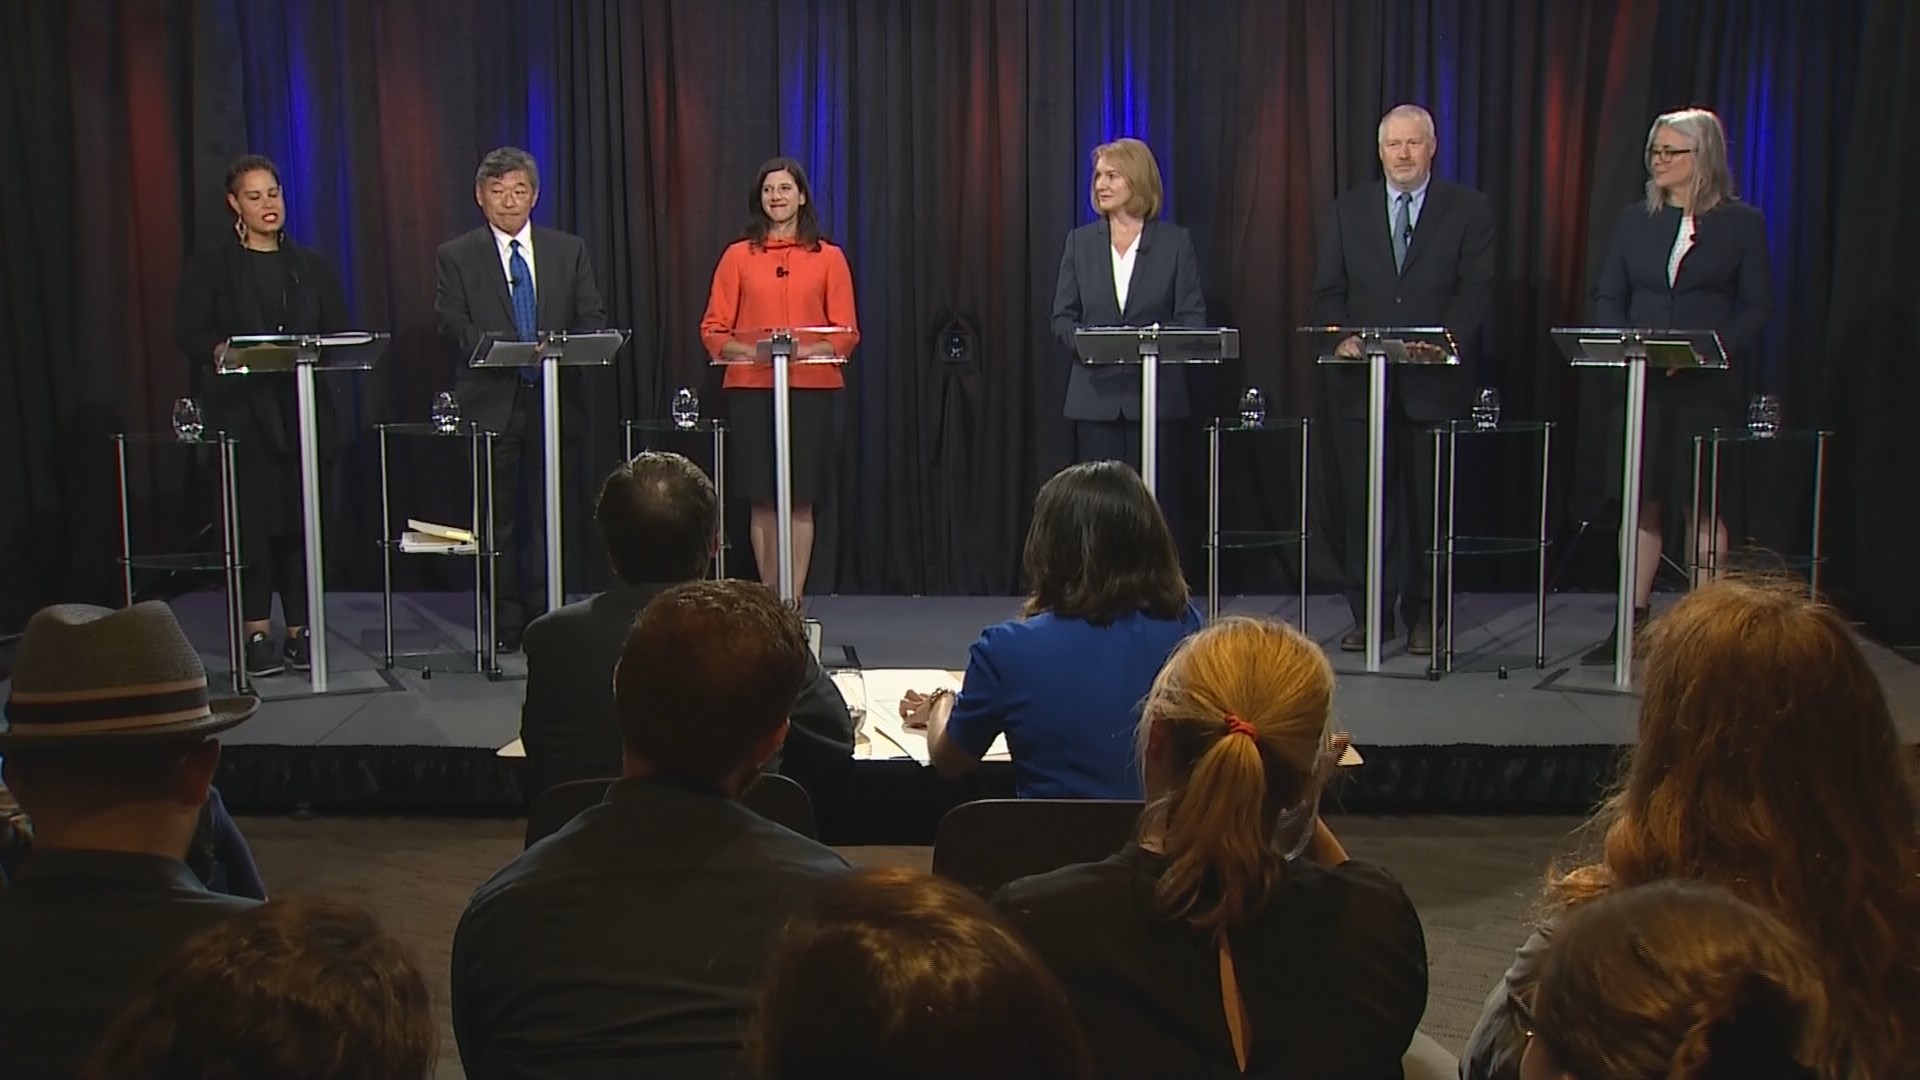 king5.com | Seattle mayoral candidates face off in televised debate